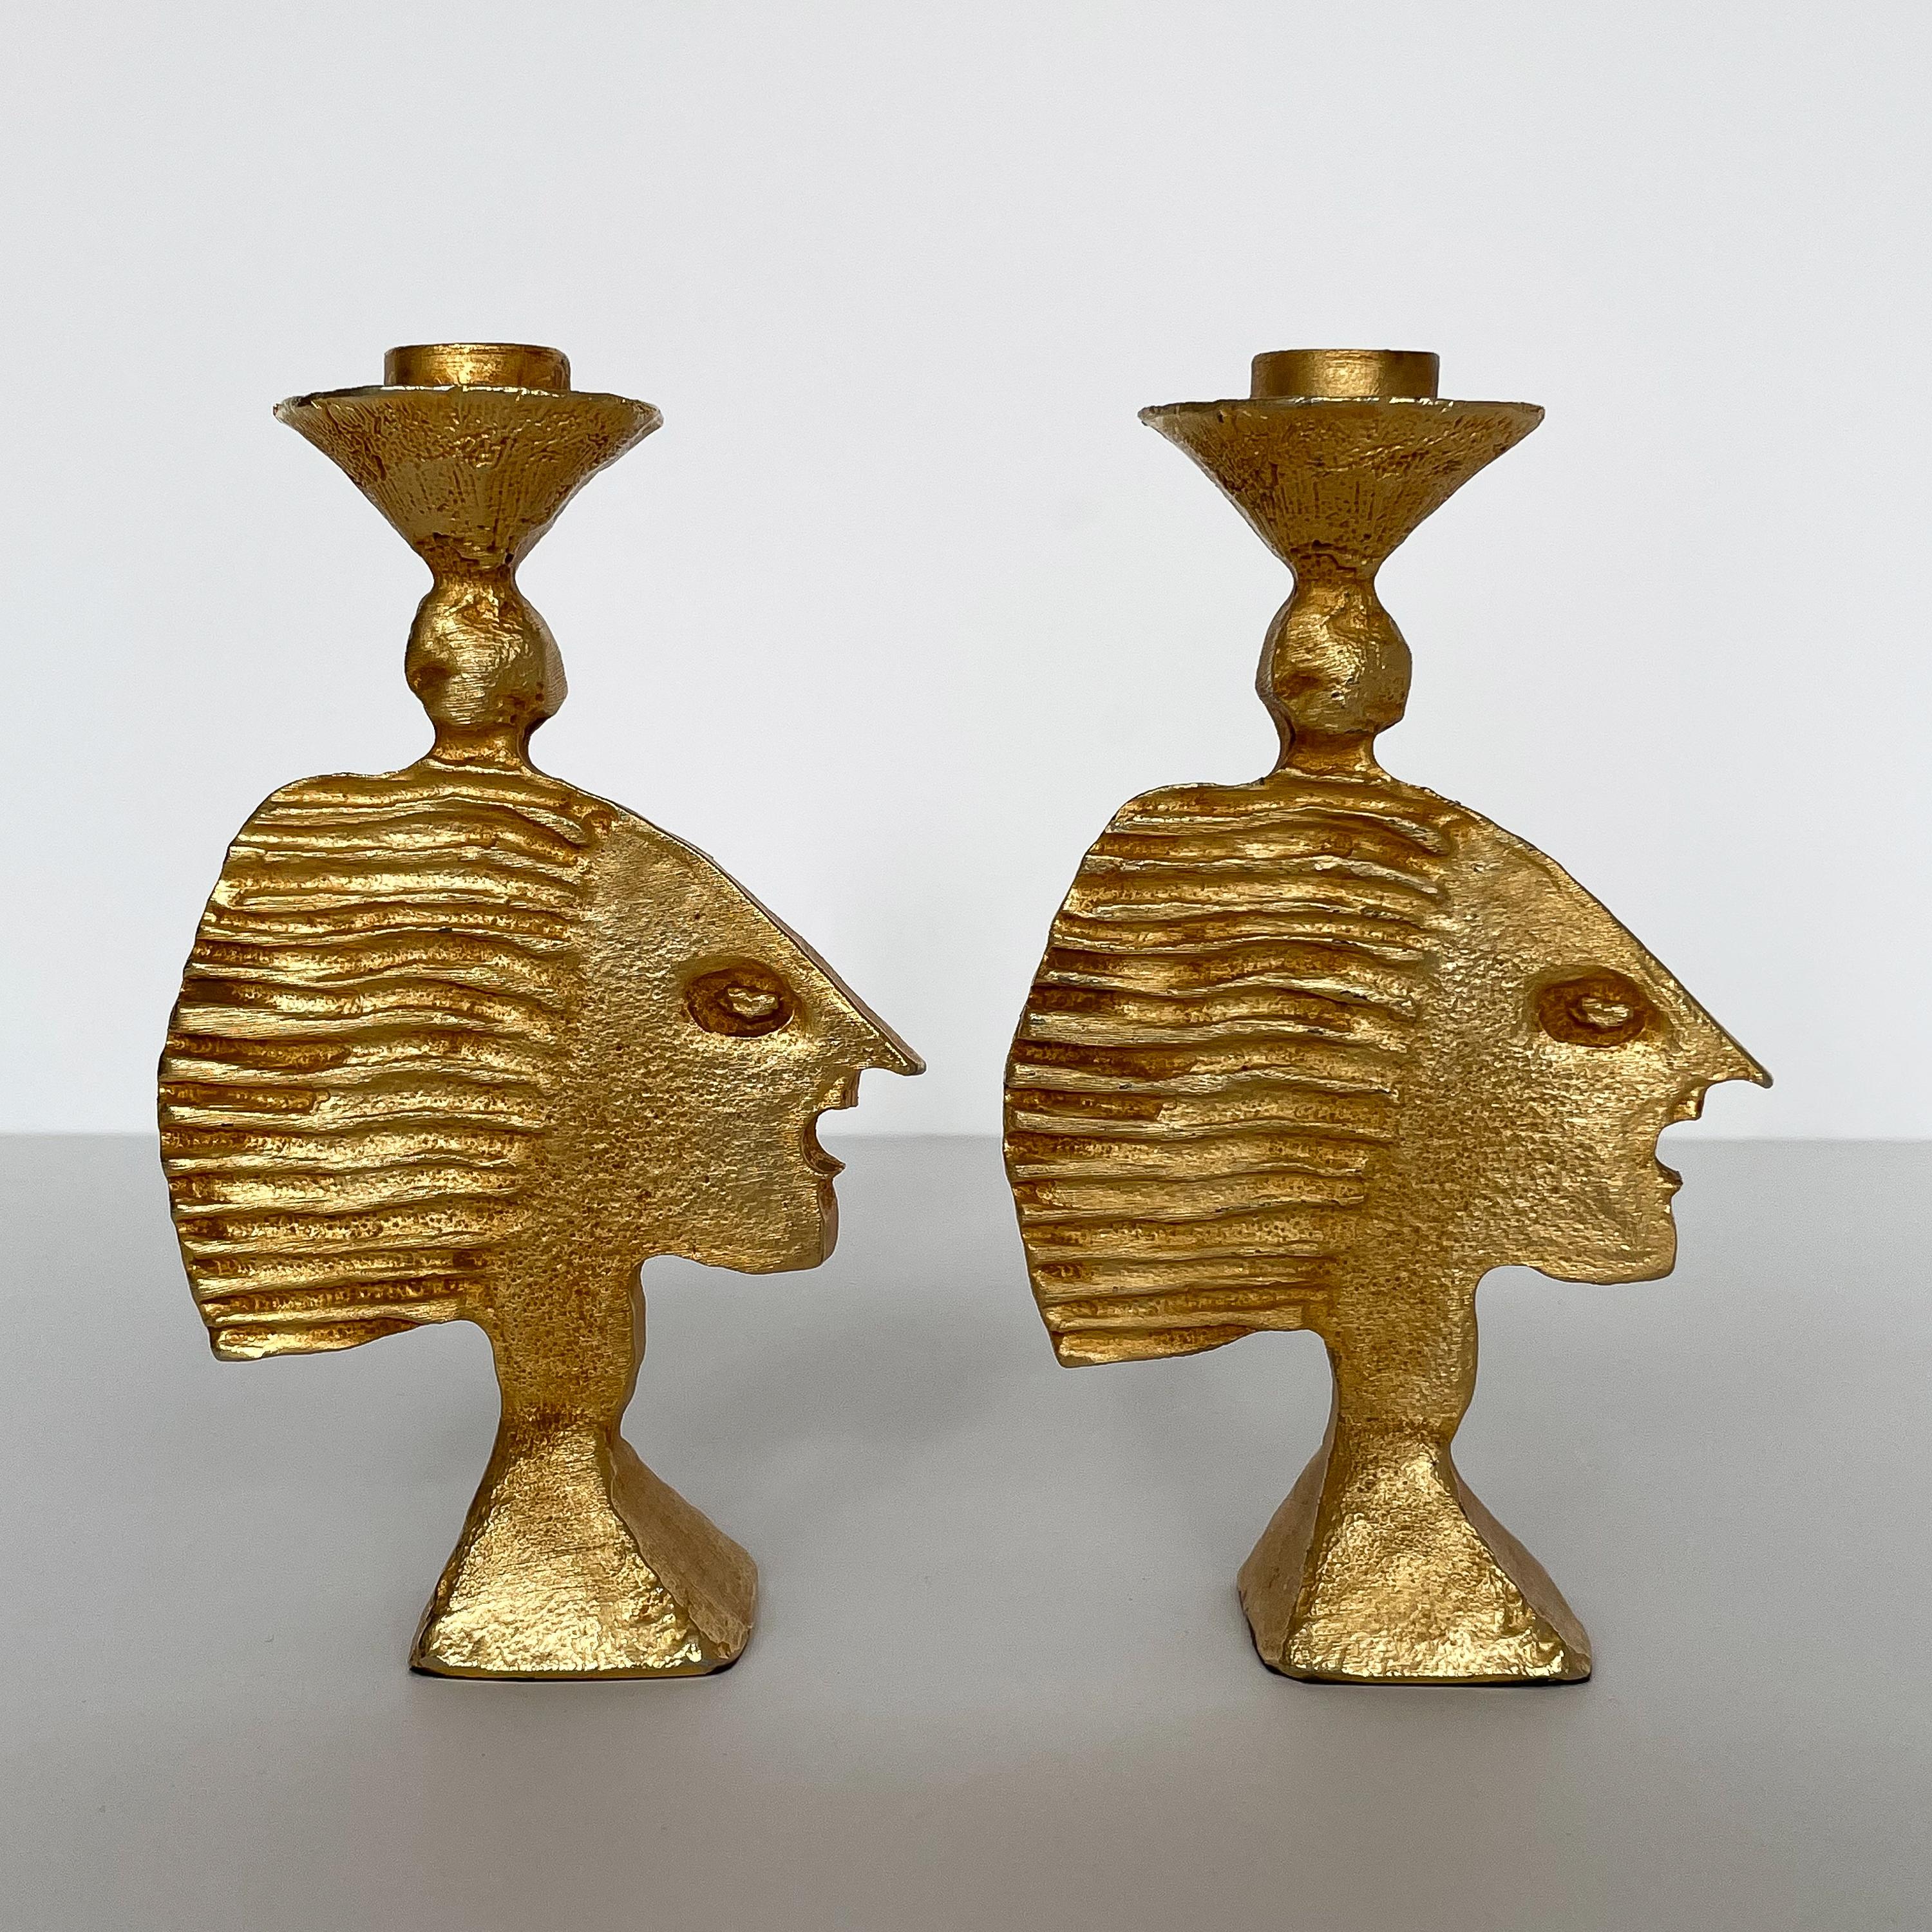 Pair of gilt metal candlesticks by Pierre Casenove for Fondica, circa 1990. These solid bronze candlesticks are gilded in gold leaf and features a stylized female face on each. Both are marked Fondica France 90. Each holds one candle and the candle